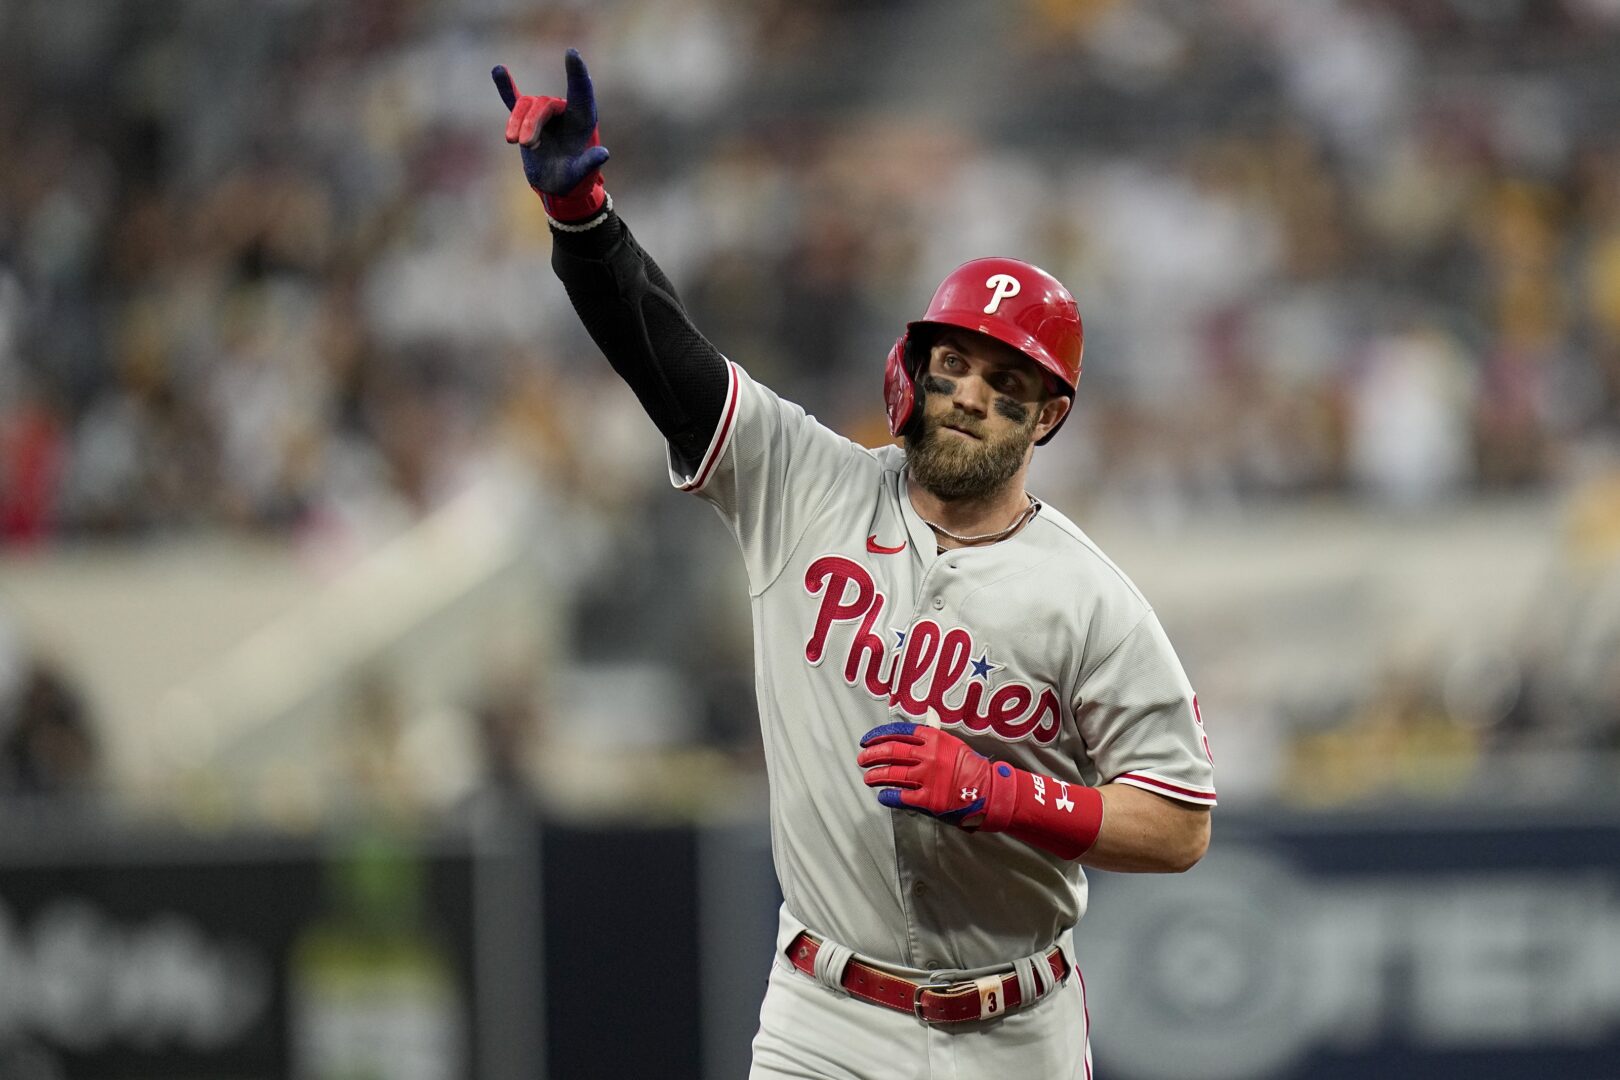 Bryce Harper's Opening Day in Philly 